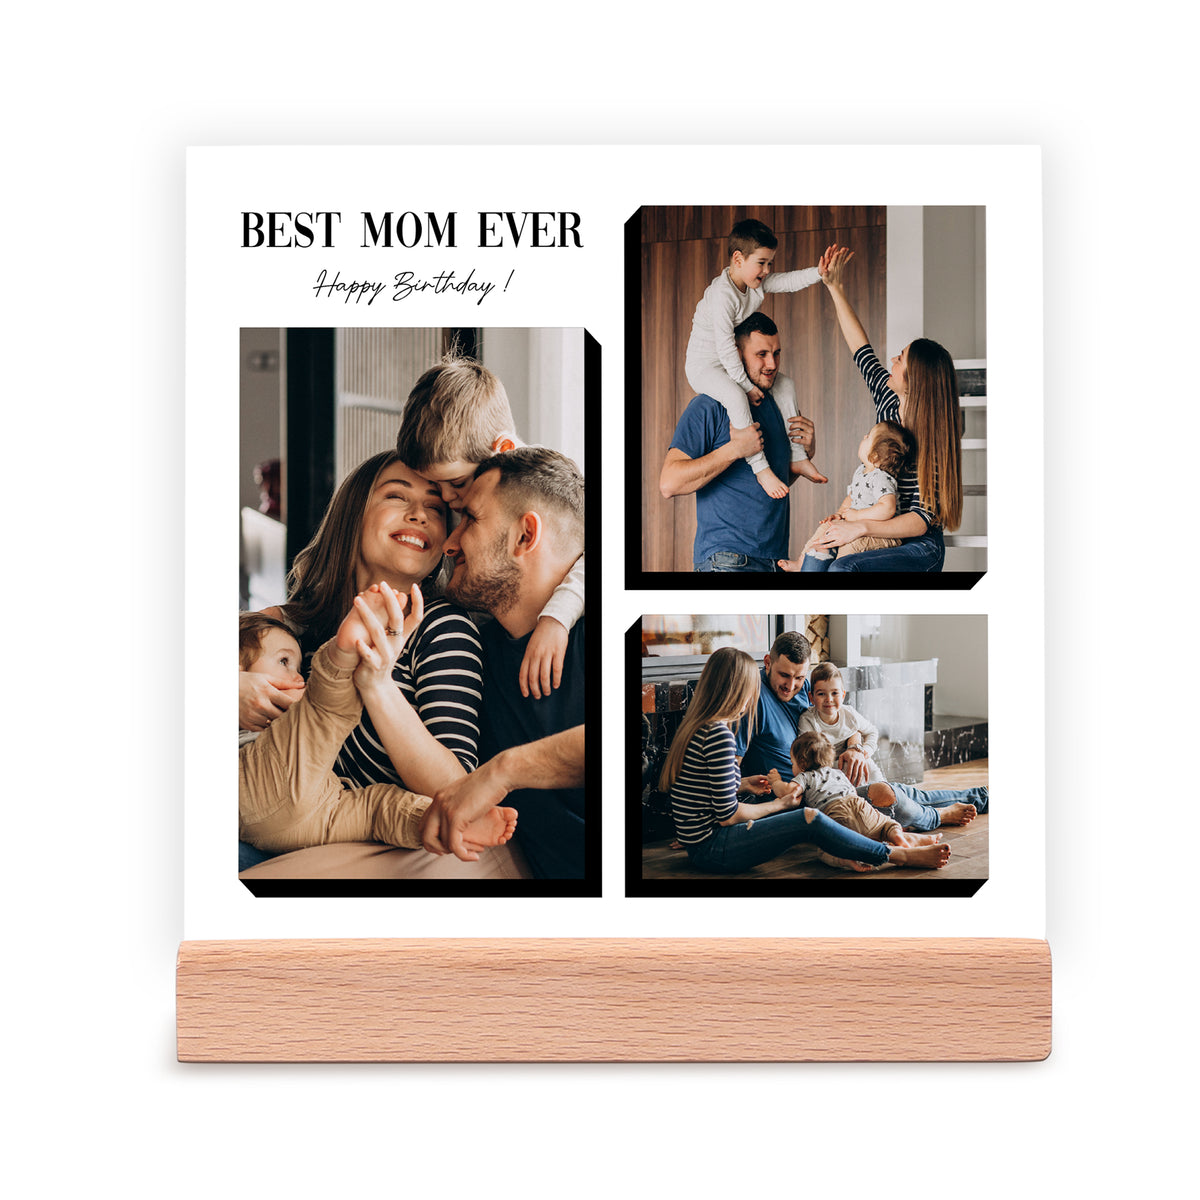 Best Mom Ever Happy Mother's Day's Gift Office Desk Sign Decor